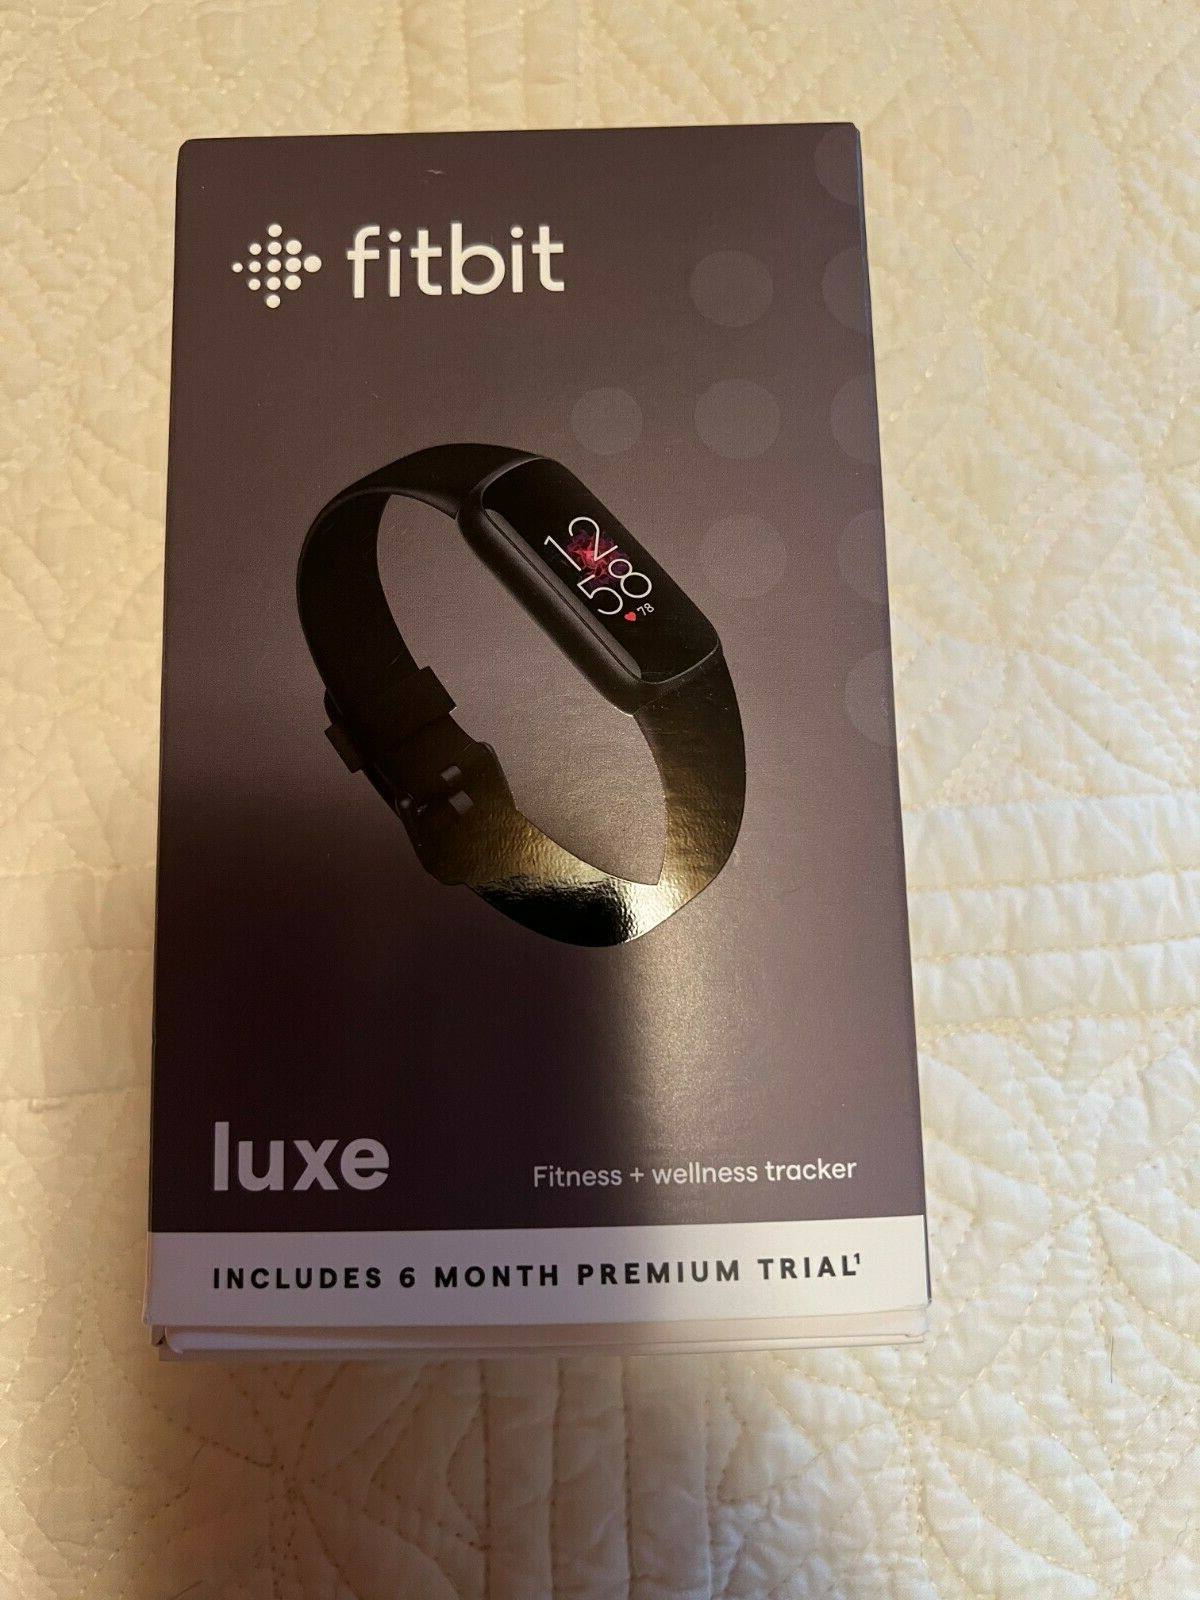 Fitbit Luxe Activity Tracker - Black/Graphite Stainless Steel